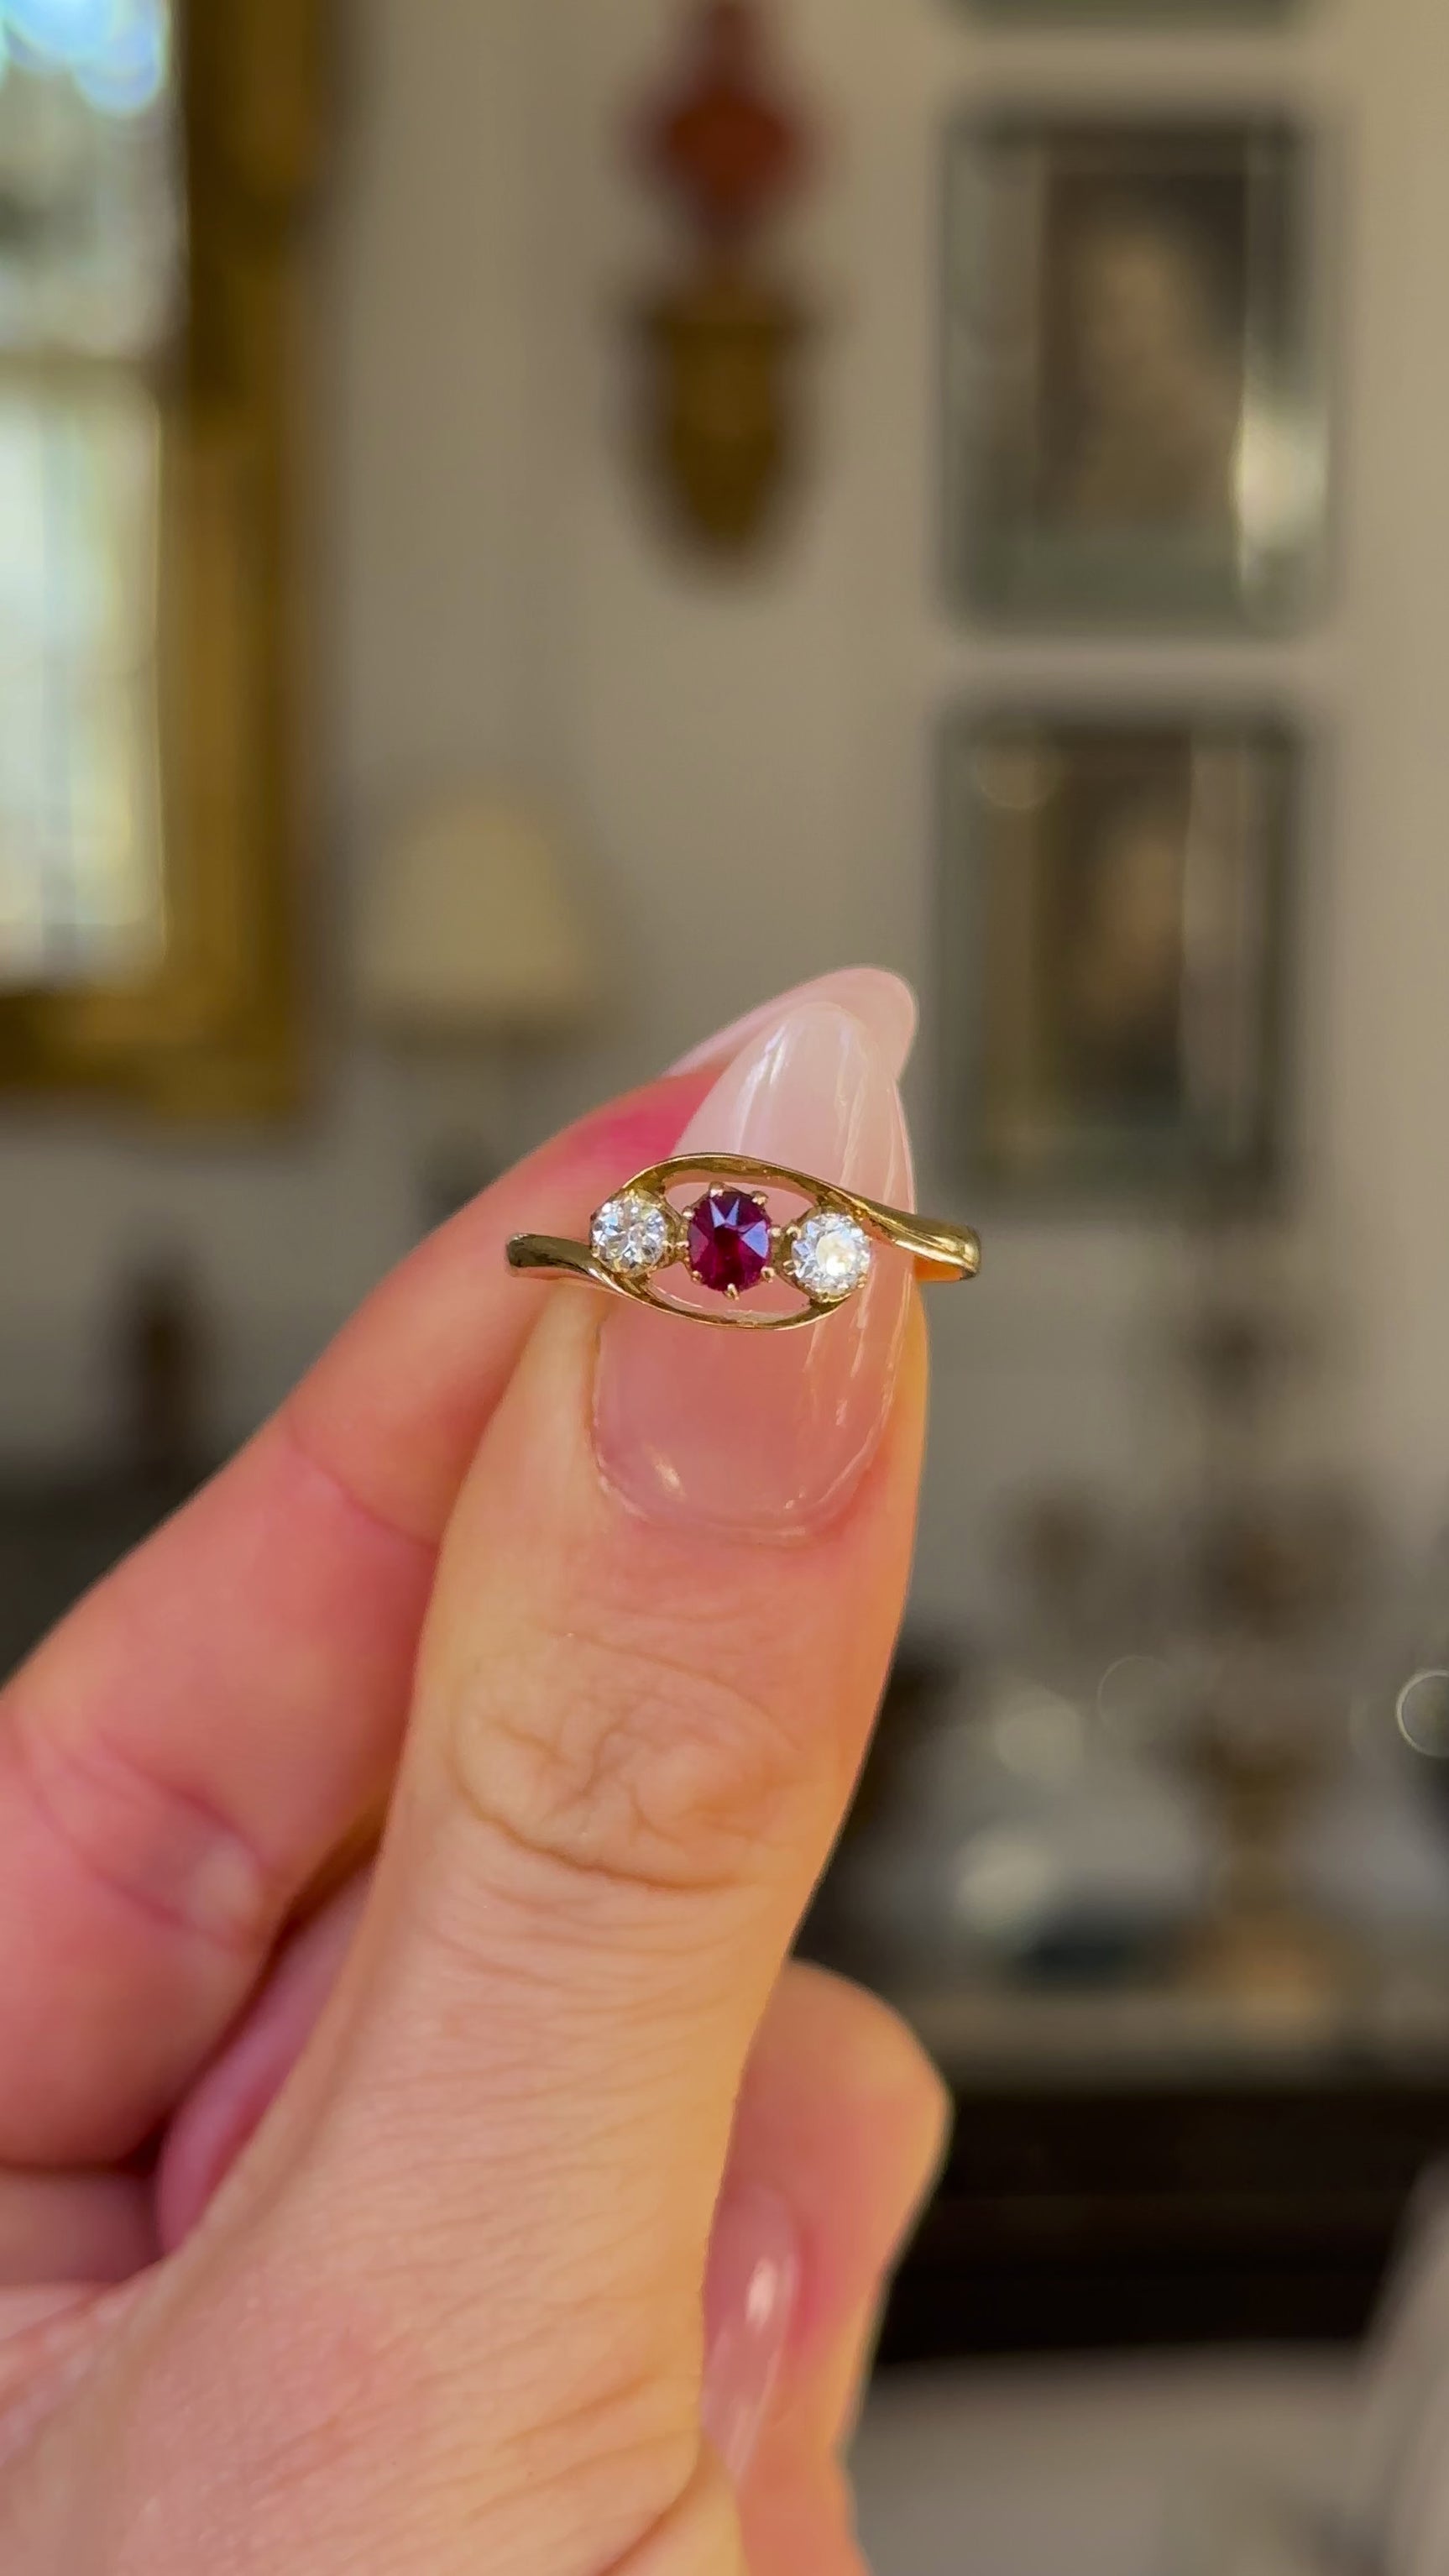 Antique, Three-Stone Ruby and Diamond Engagement Ring, 18ct Yellow Gold held in fingers and rotated to give perspective.